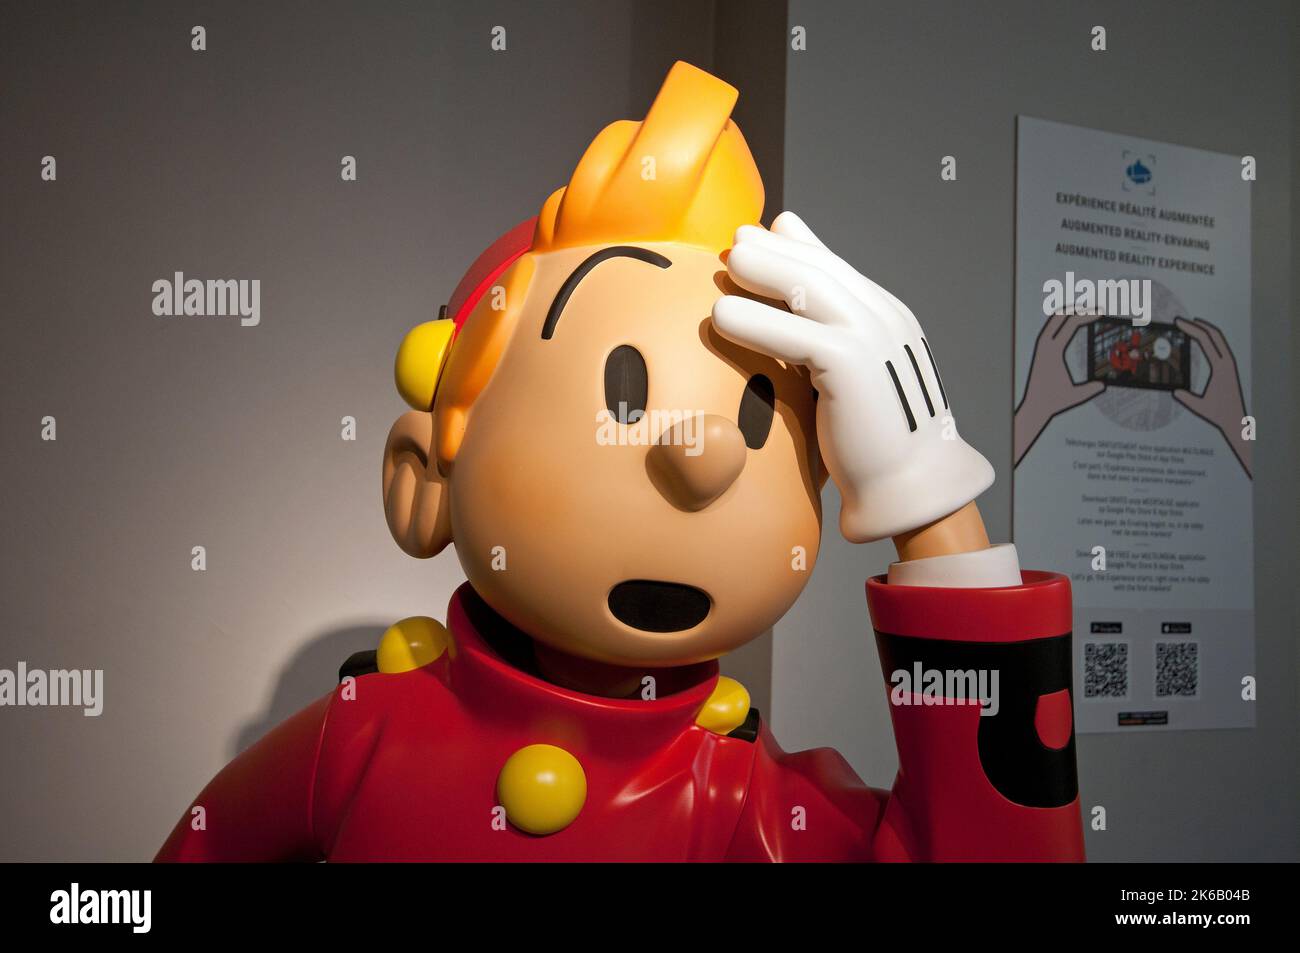 Statue of Tintin (character created by Hergé in 1929), Comics Art Museum, Brussels, Belgium Stock Photo